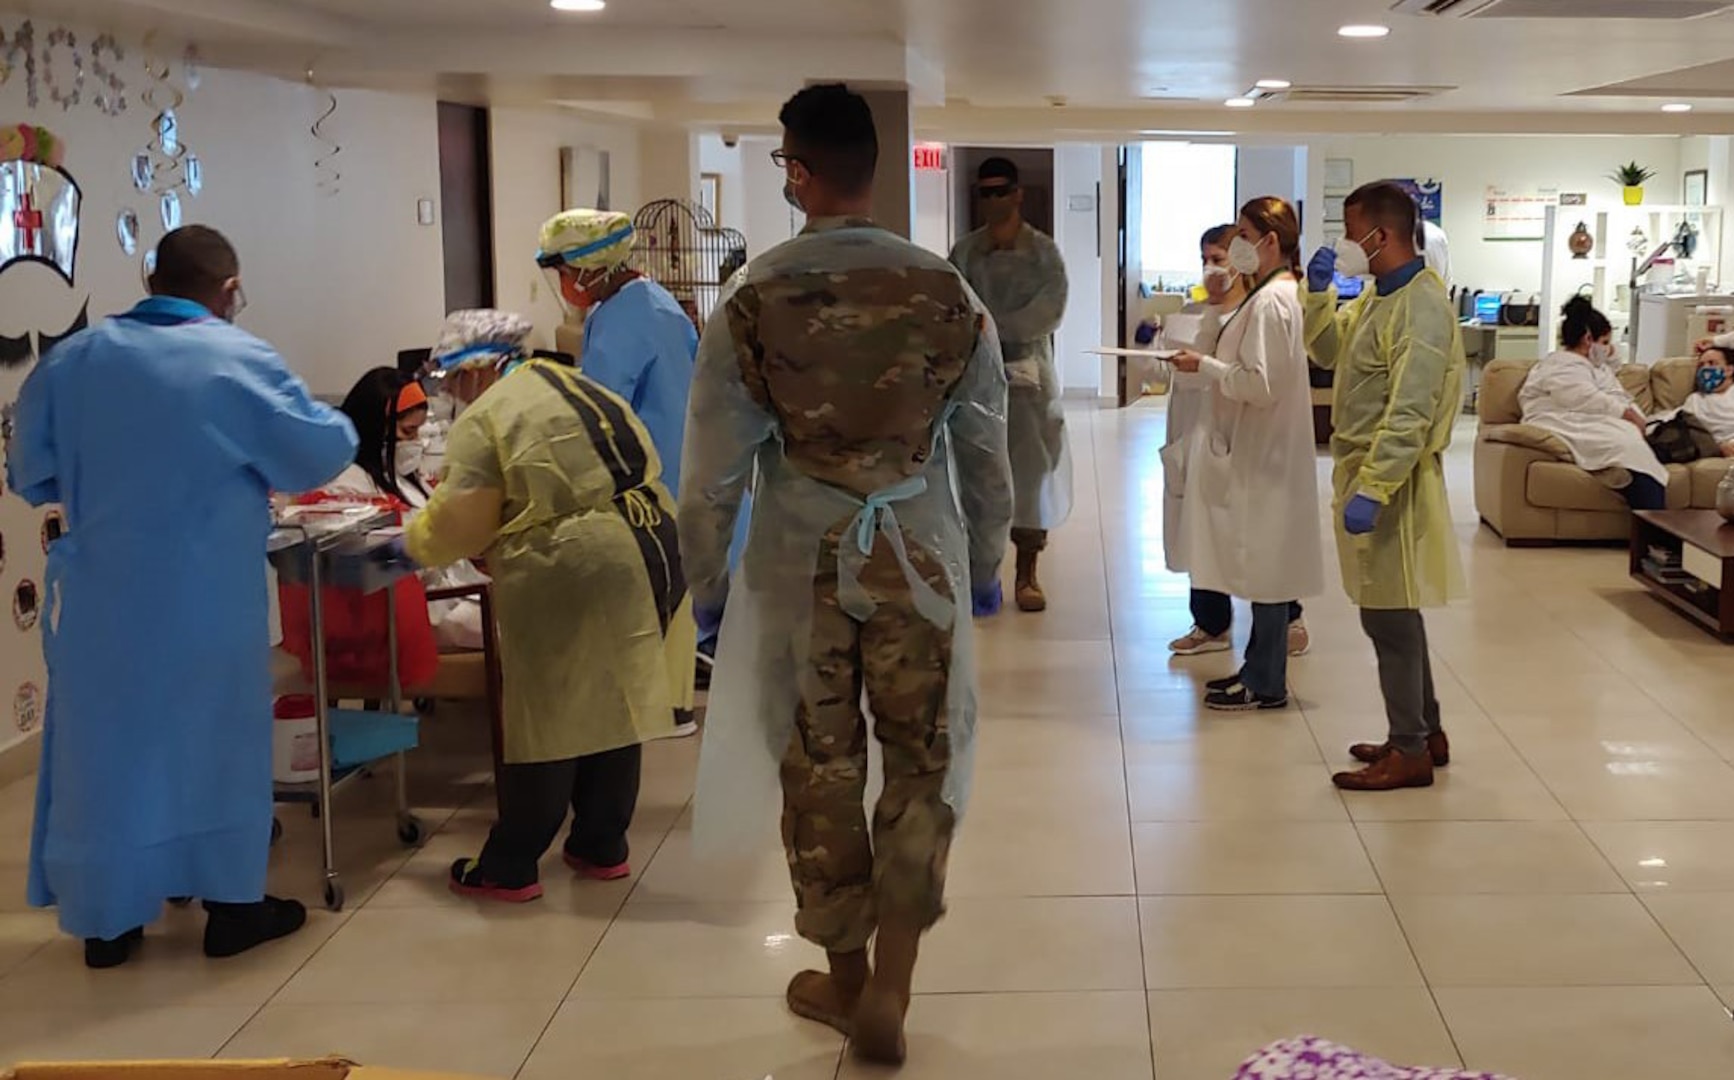 The Puerto Rico National Guard is helping test residents of nursing homes around the island for COVID-19 to help prevent the spread of the coronavirus.